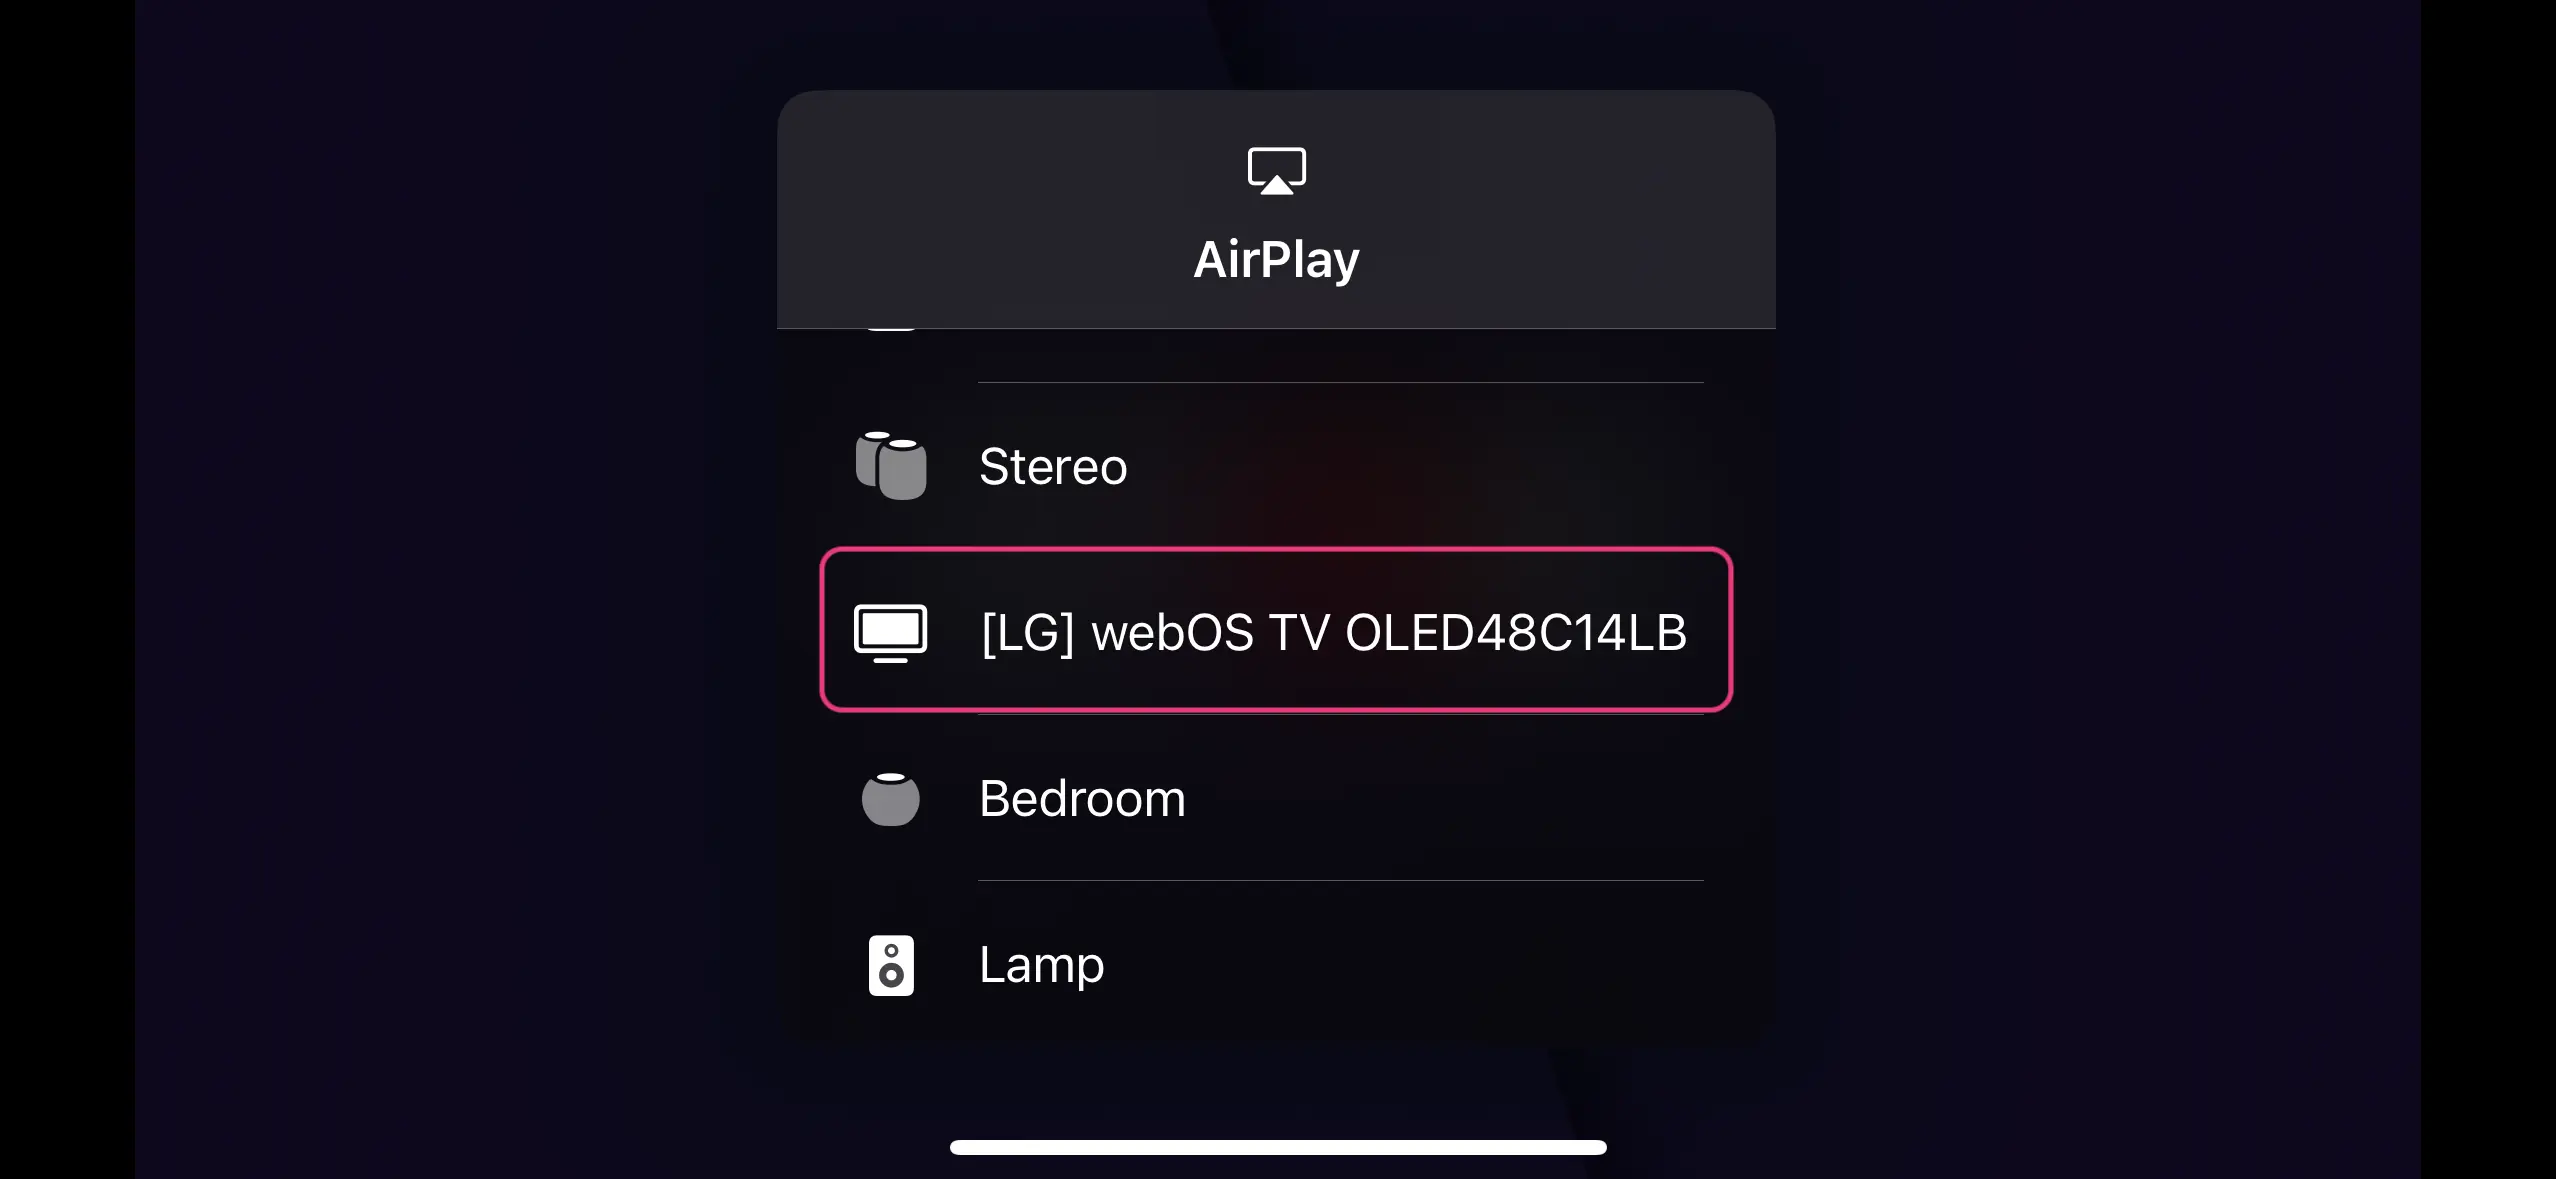 Device selection interface for AirPlay, highlighting an LG C1 TV as the chosen device. The AirPlay icon is at the top center.